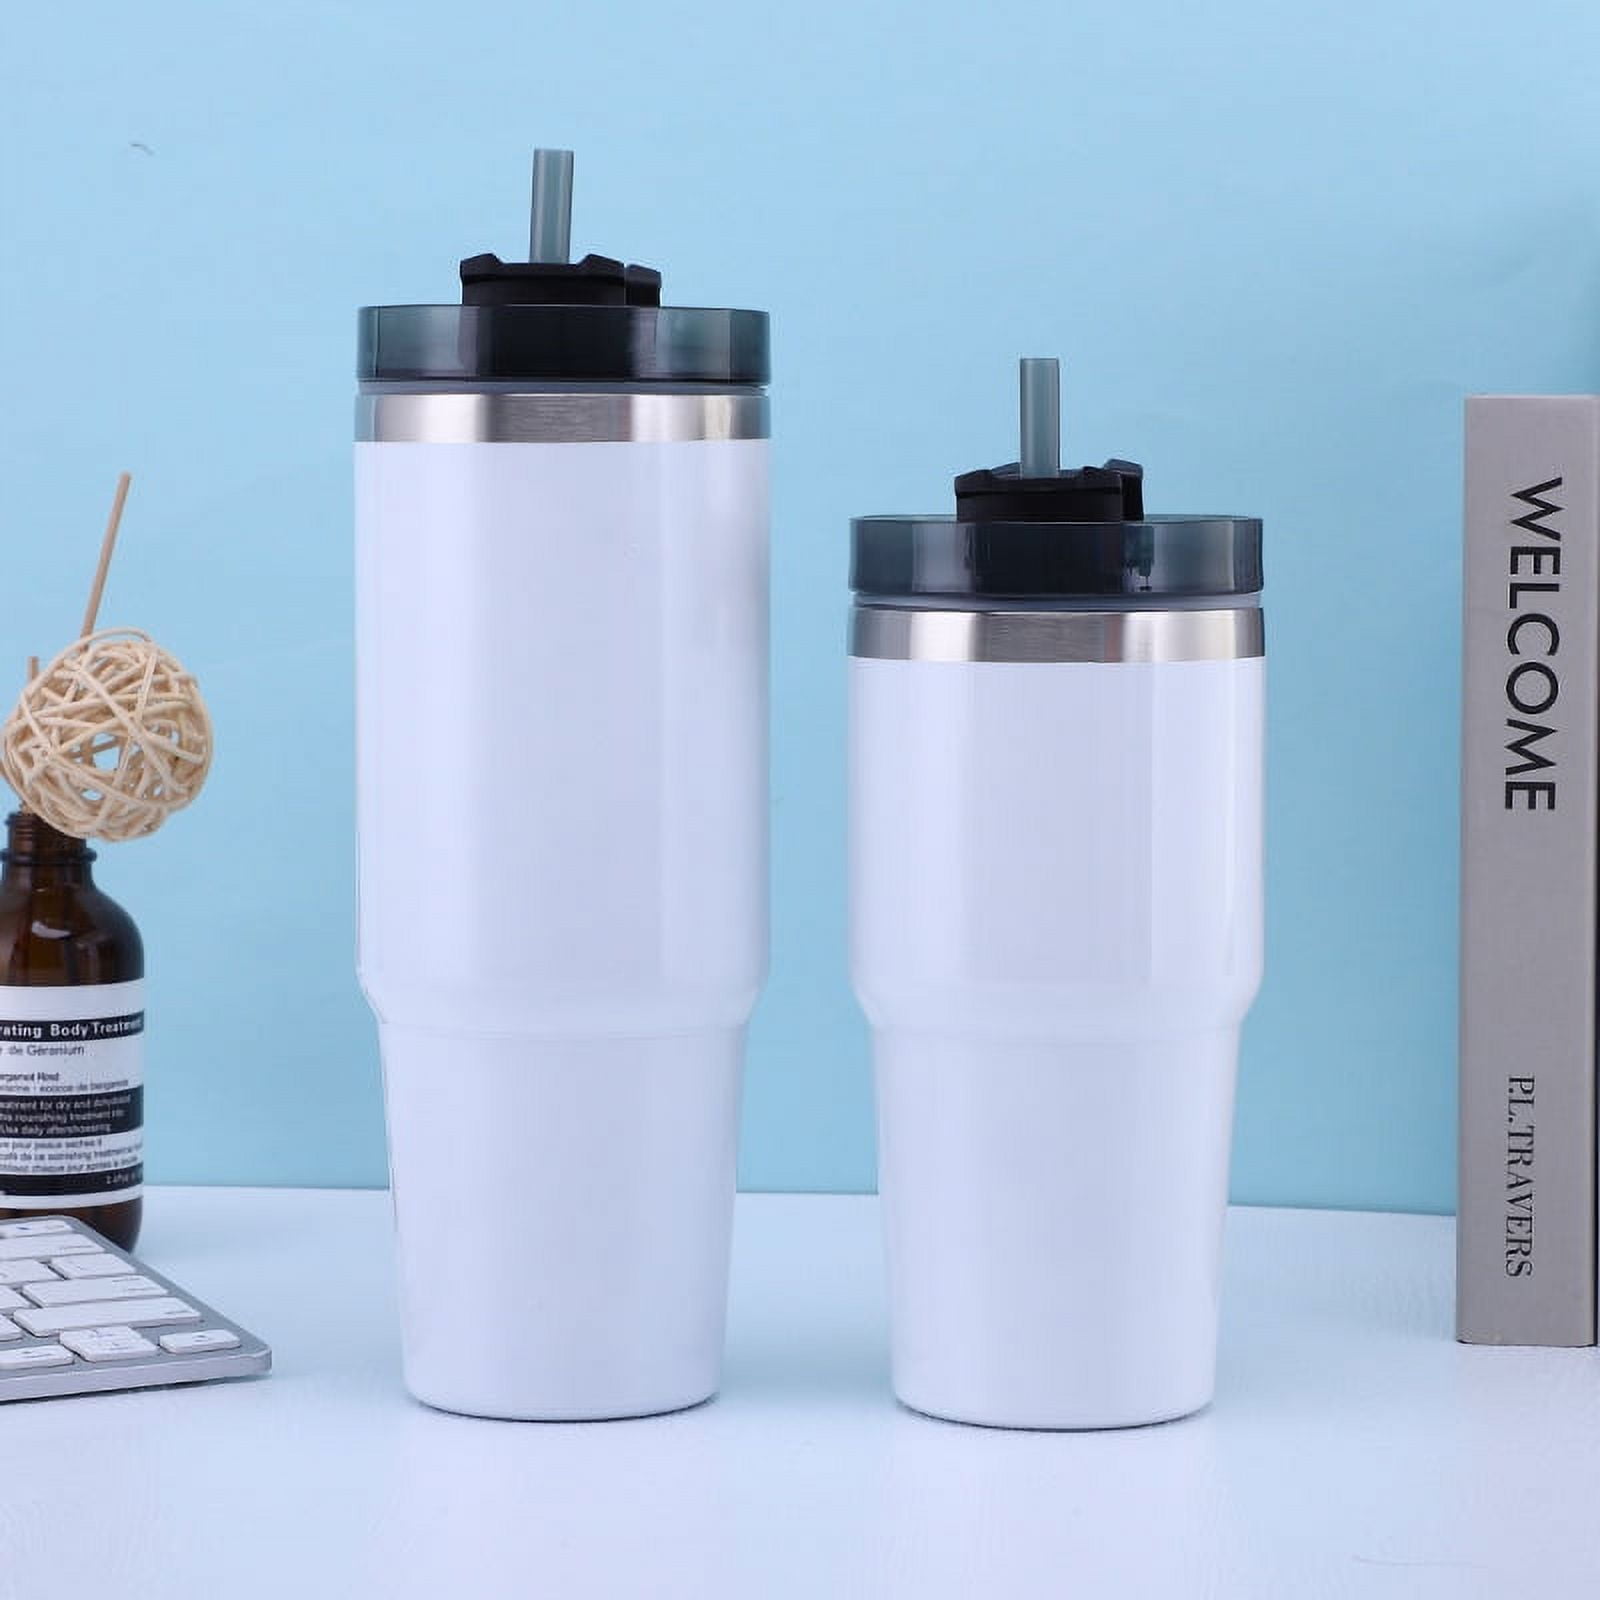 WETOWETO 30 oz Tumbler Stainless Steel Vacuum Insulated Coffee Ice Cup  Double Wall Vacuum Coffee Cup…See more WETOWETO 30 oz Tumbler Stainless  Steel